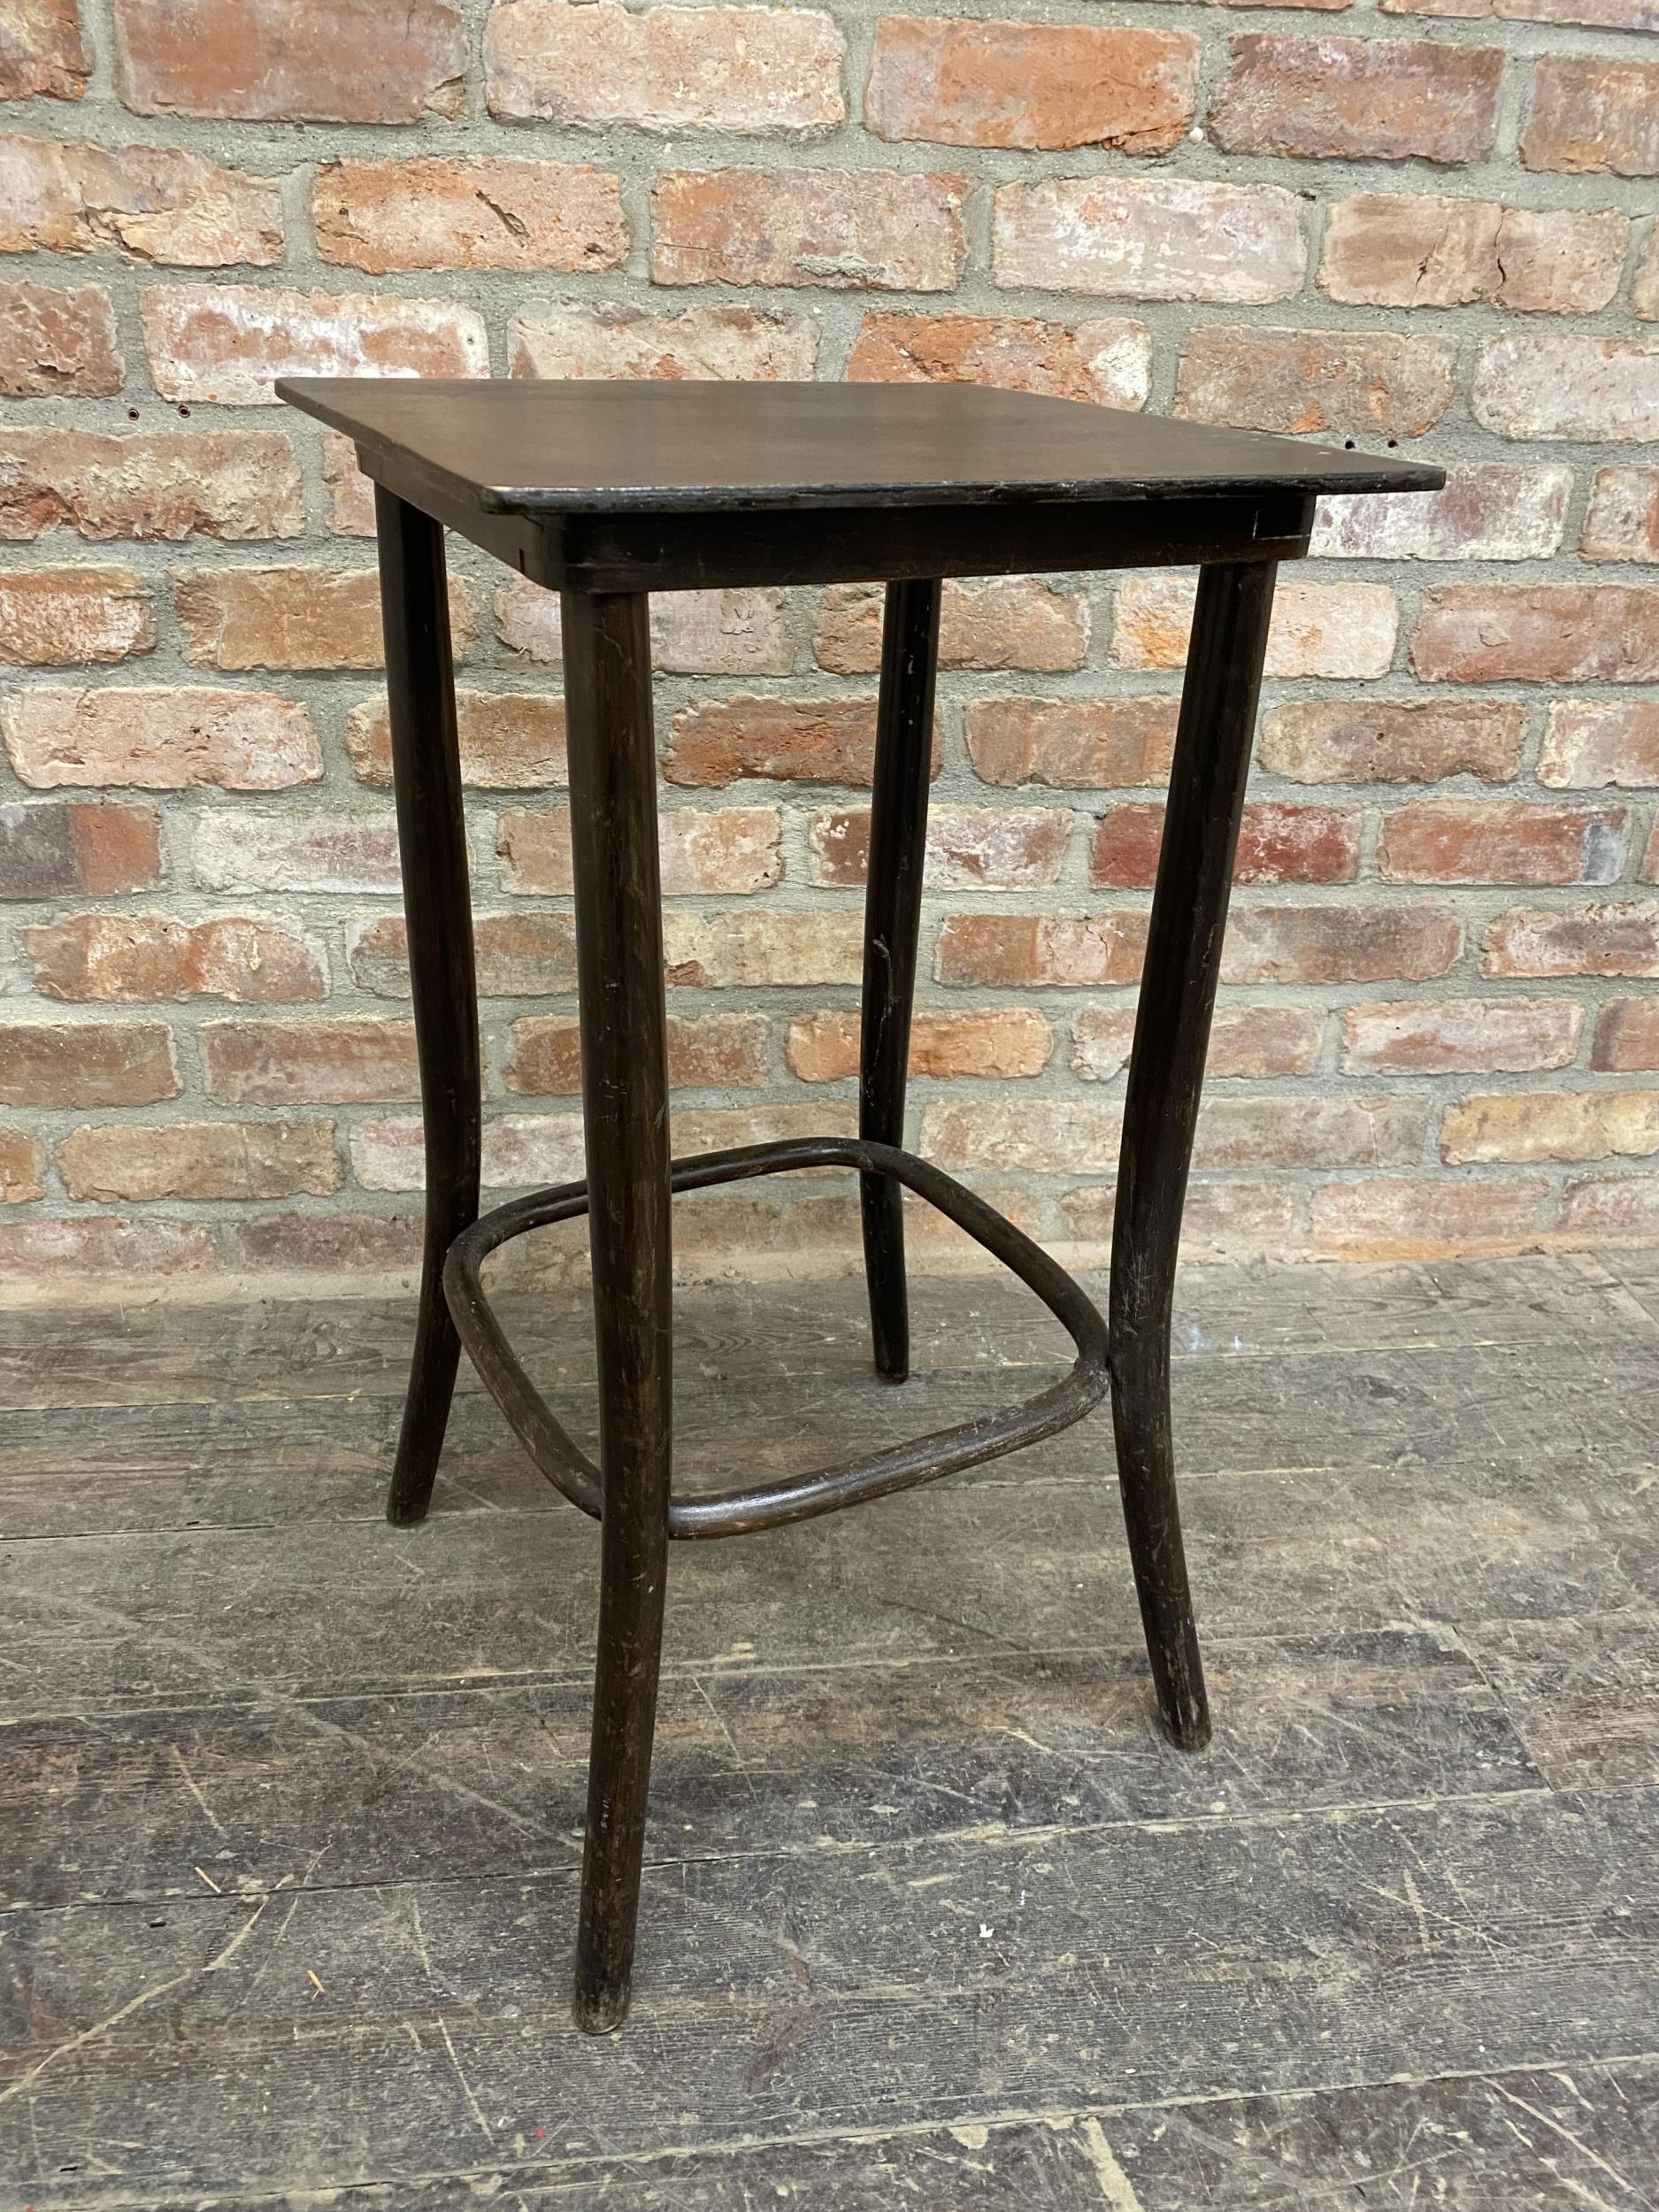 Fischel bentwood bar table or stand, typical bentwod frame, 78 x 43cm